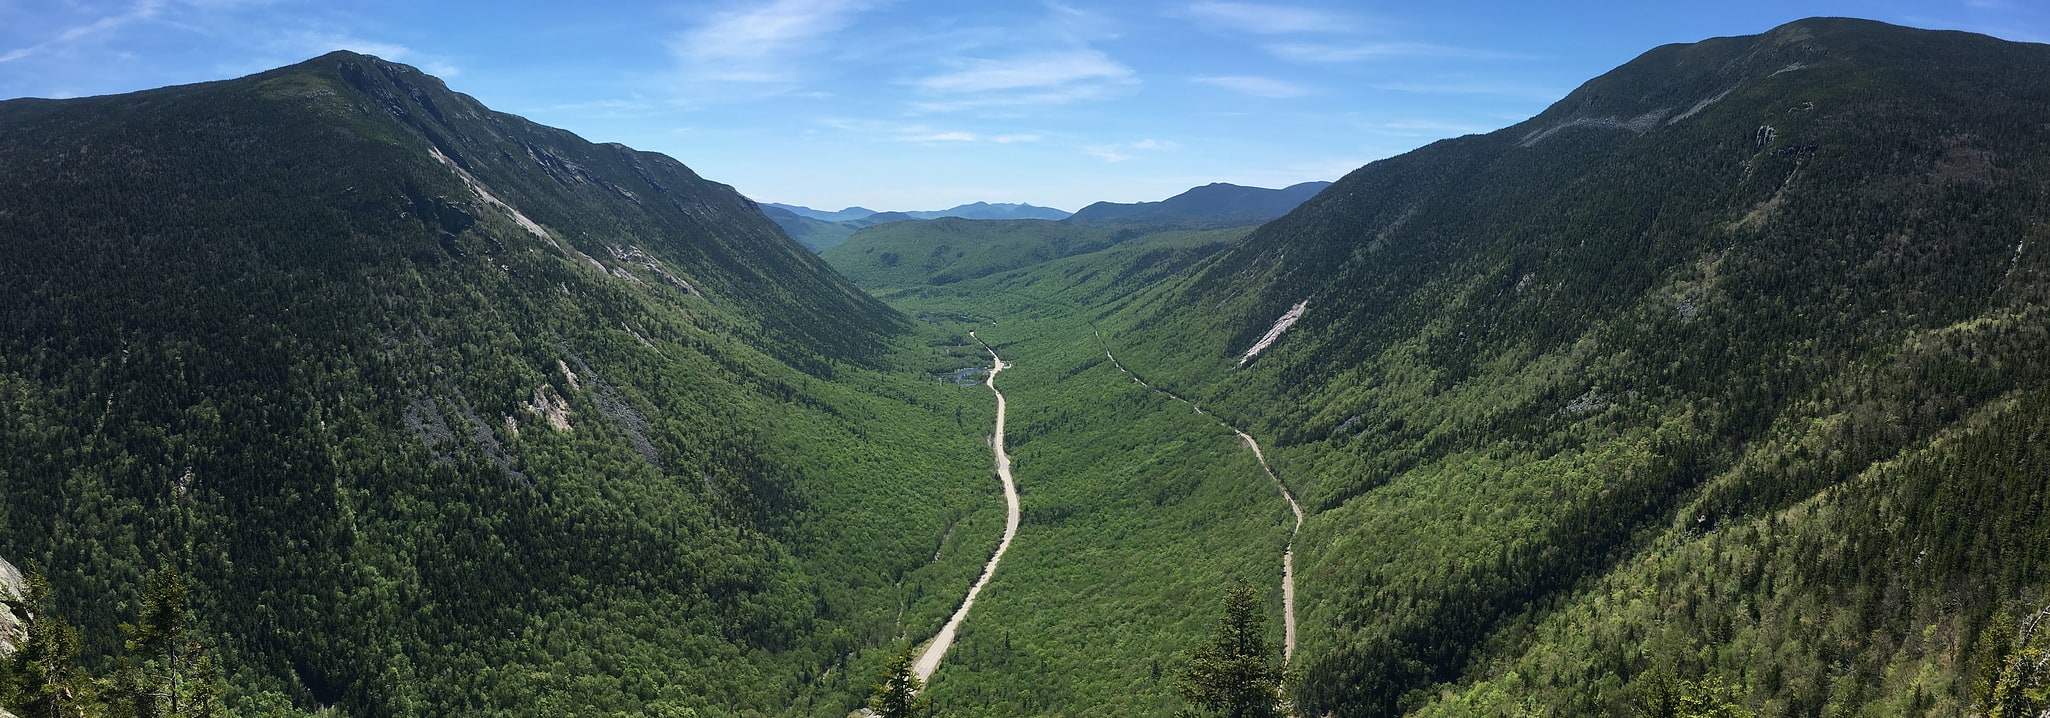 Crawford Notch State Park, United States